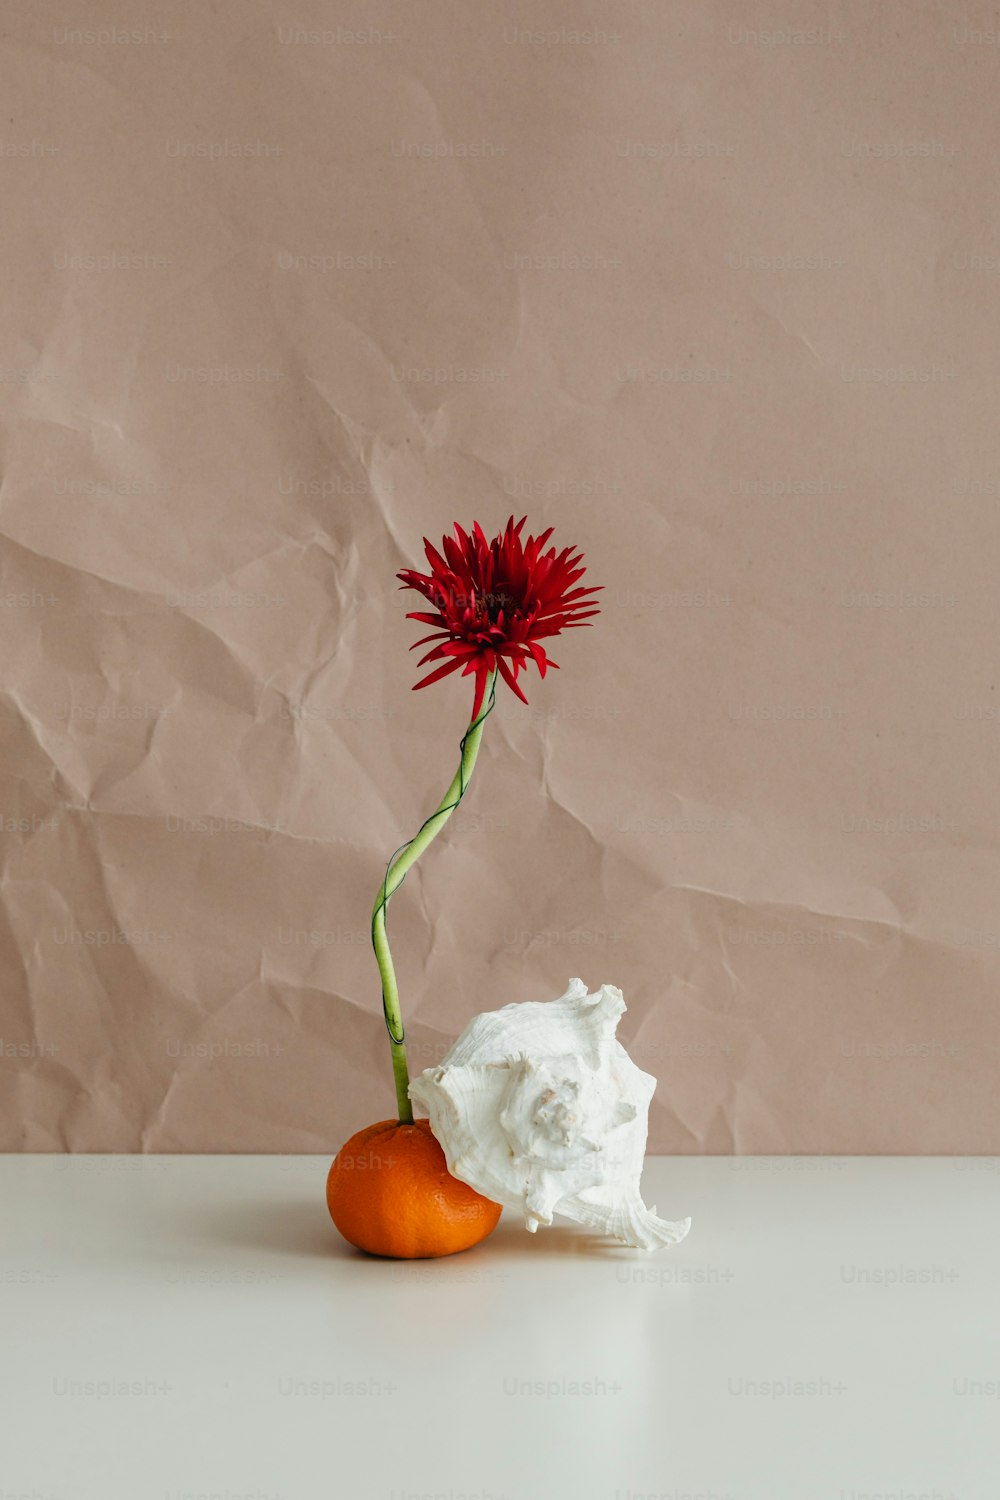 a flower in a vase with a piece of cloth next to it